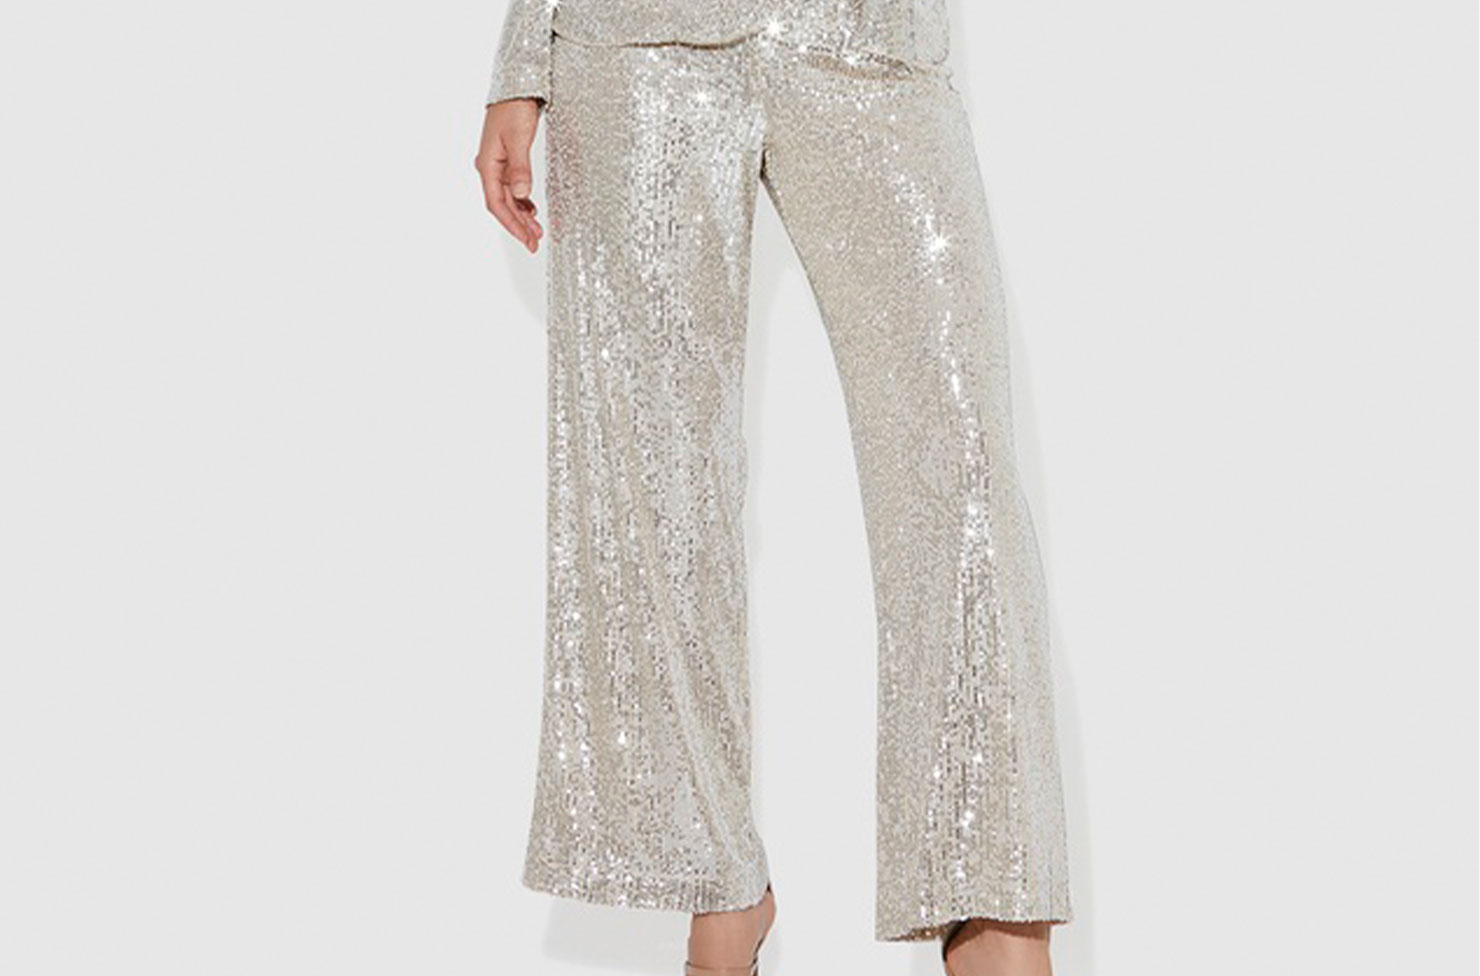 Make an epic statement in our Sequin Silver Flare Pants. These